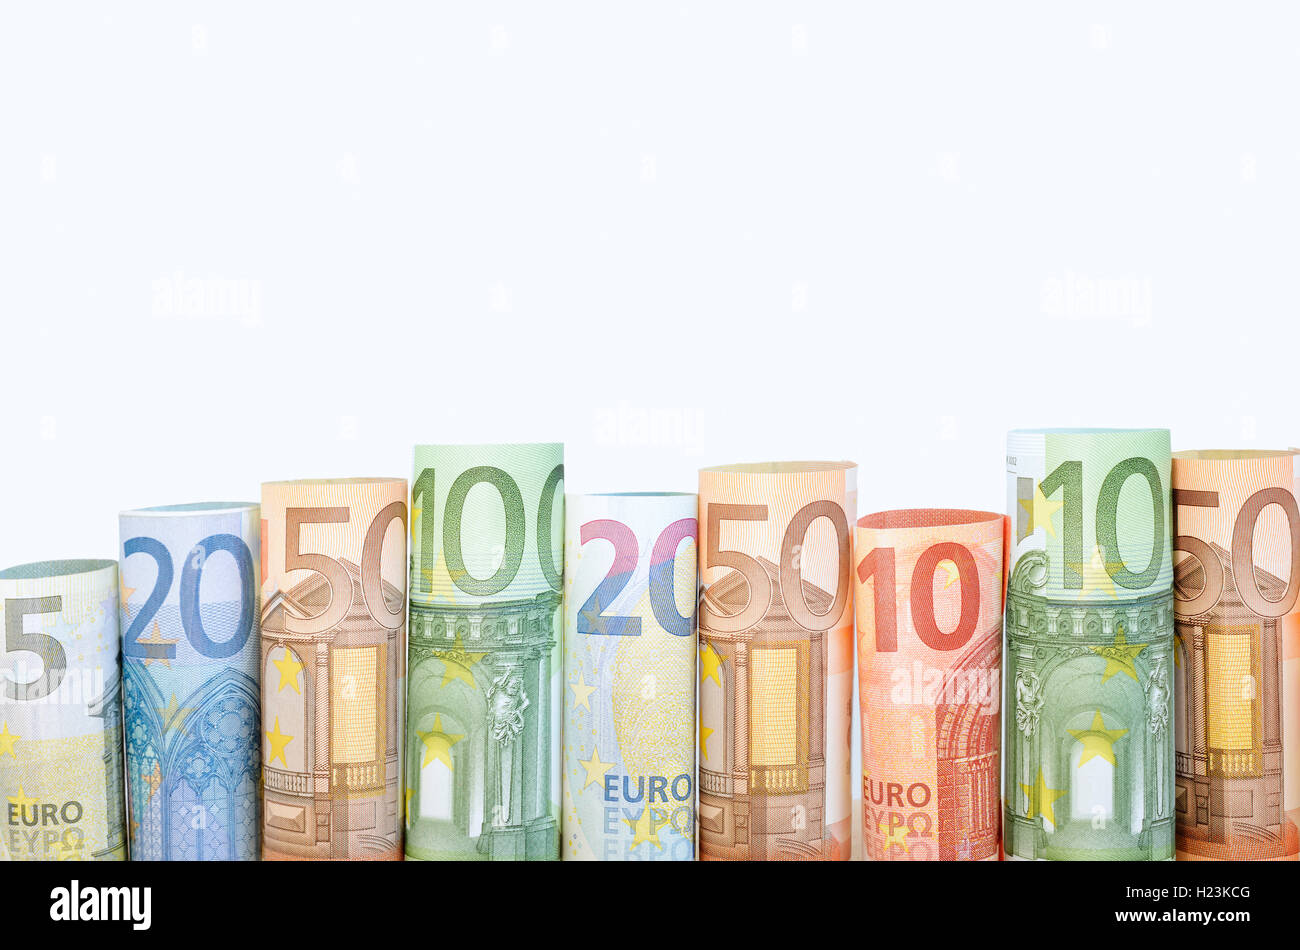 Rolls of various euro banknotes Stock Photo